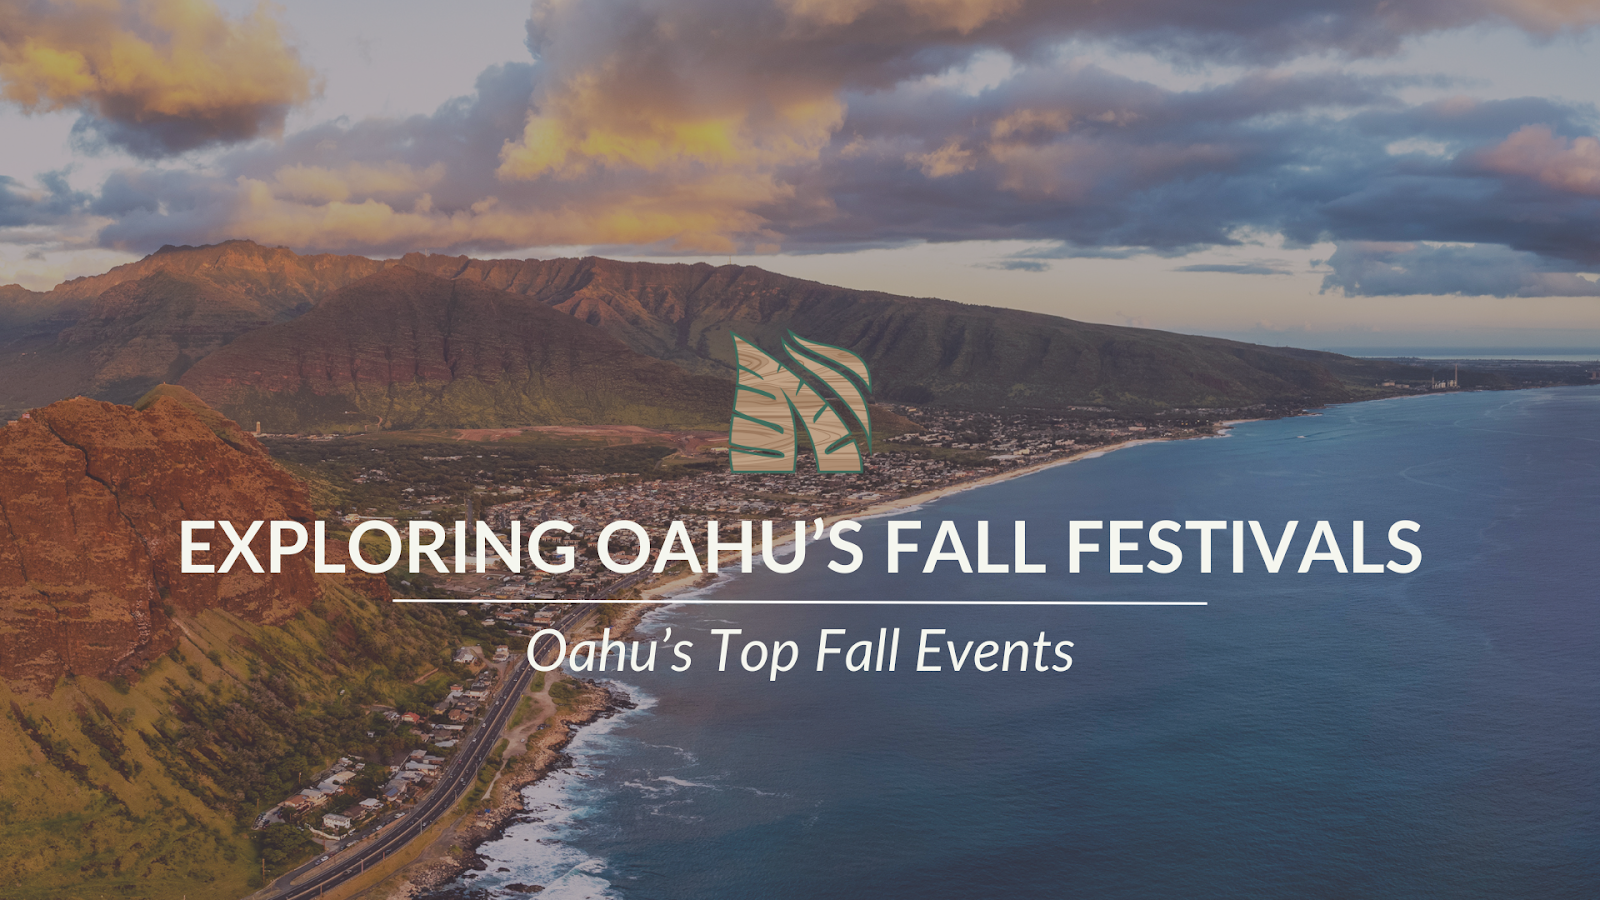 Fall festivals and things to do on Oahu in October